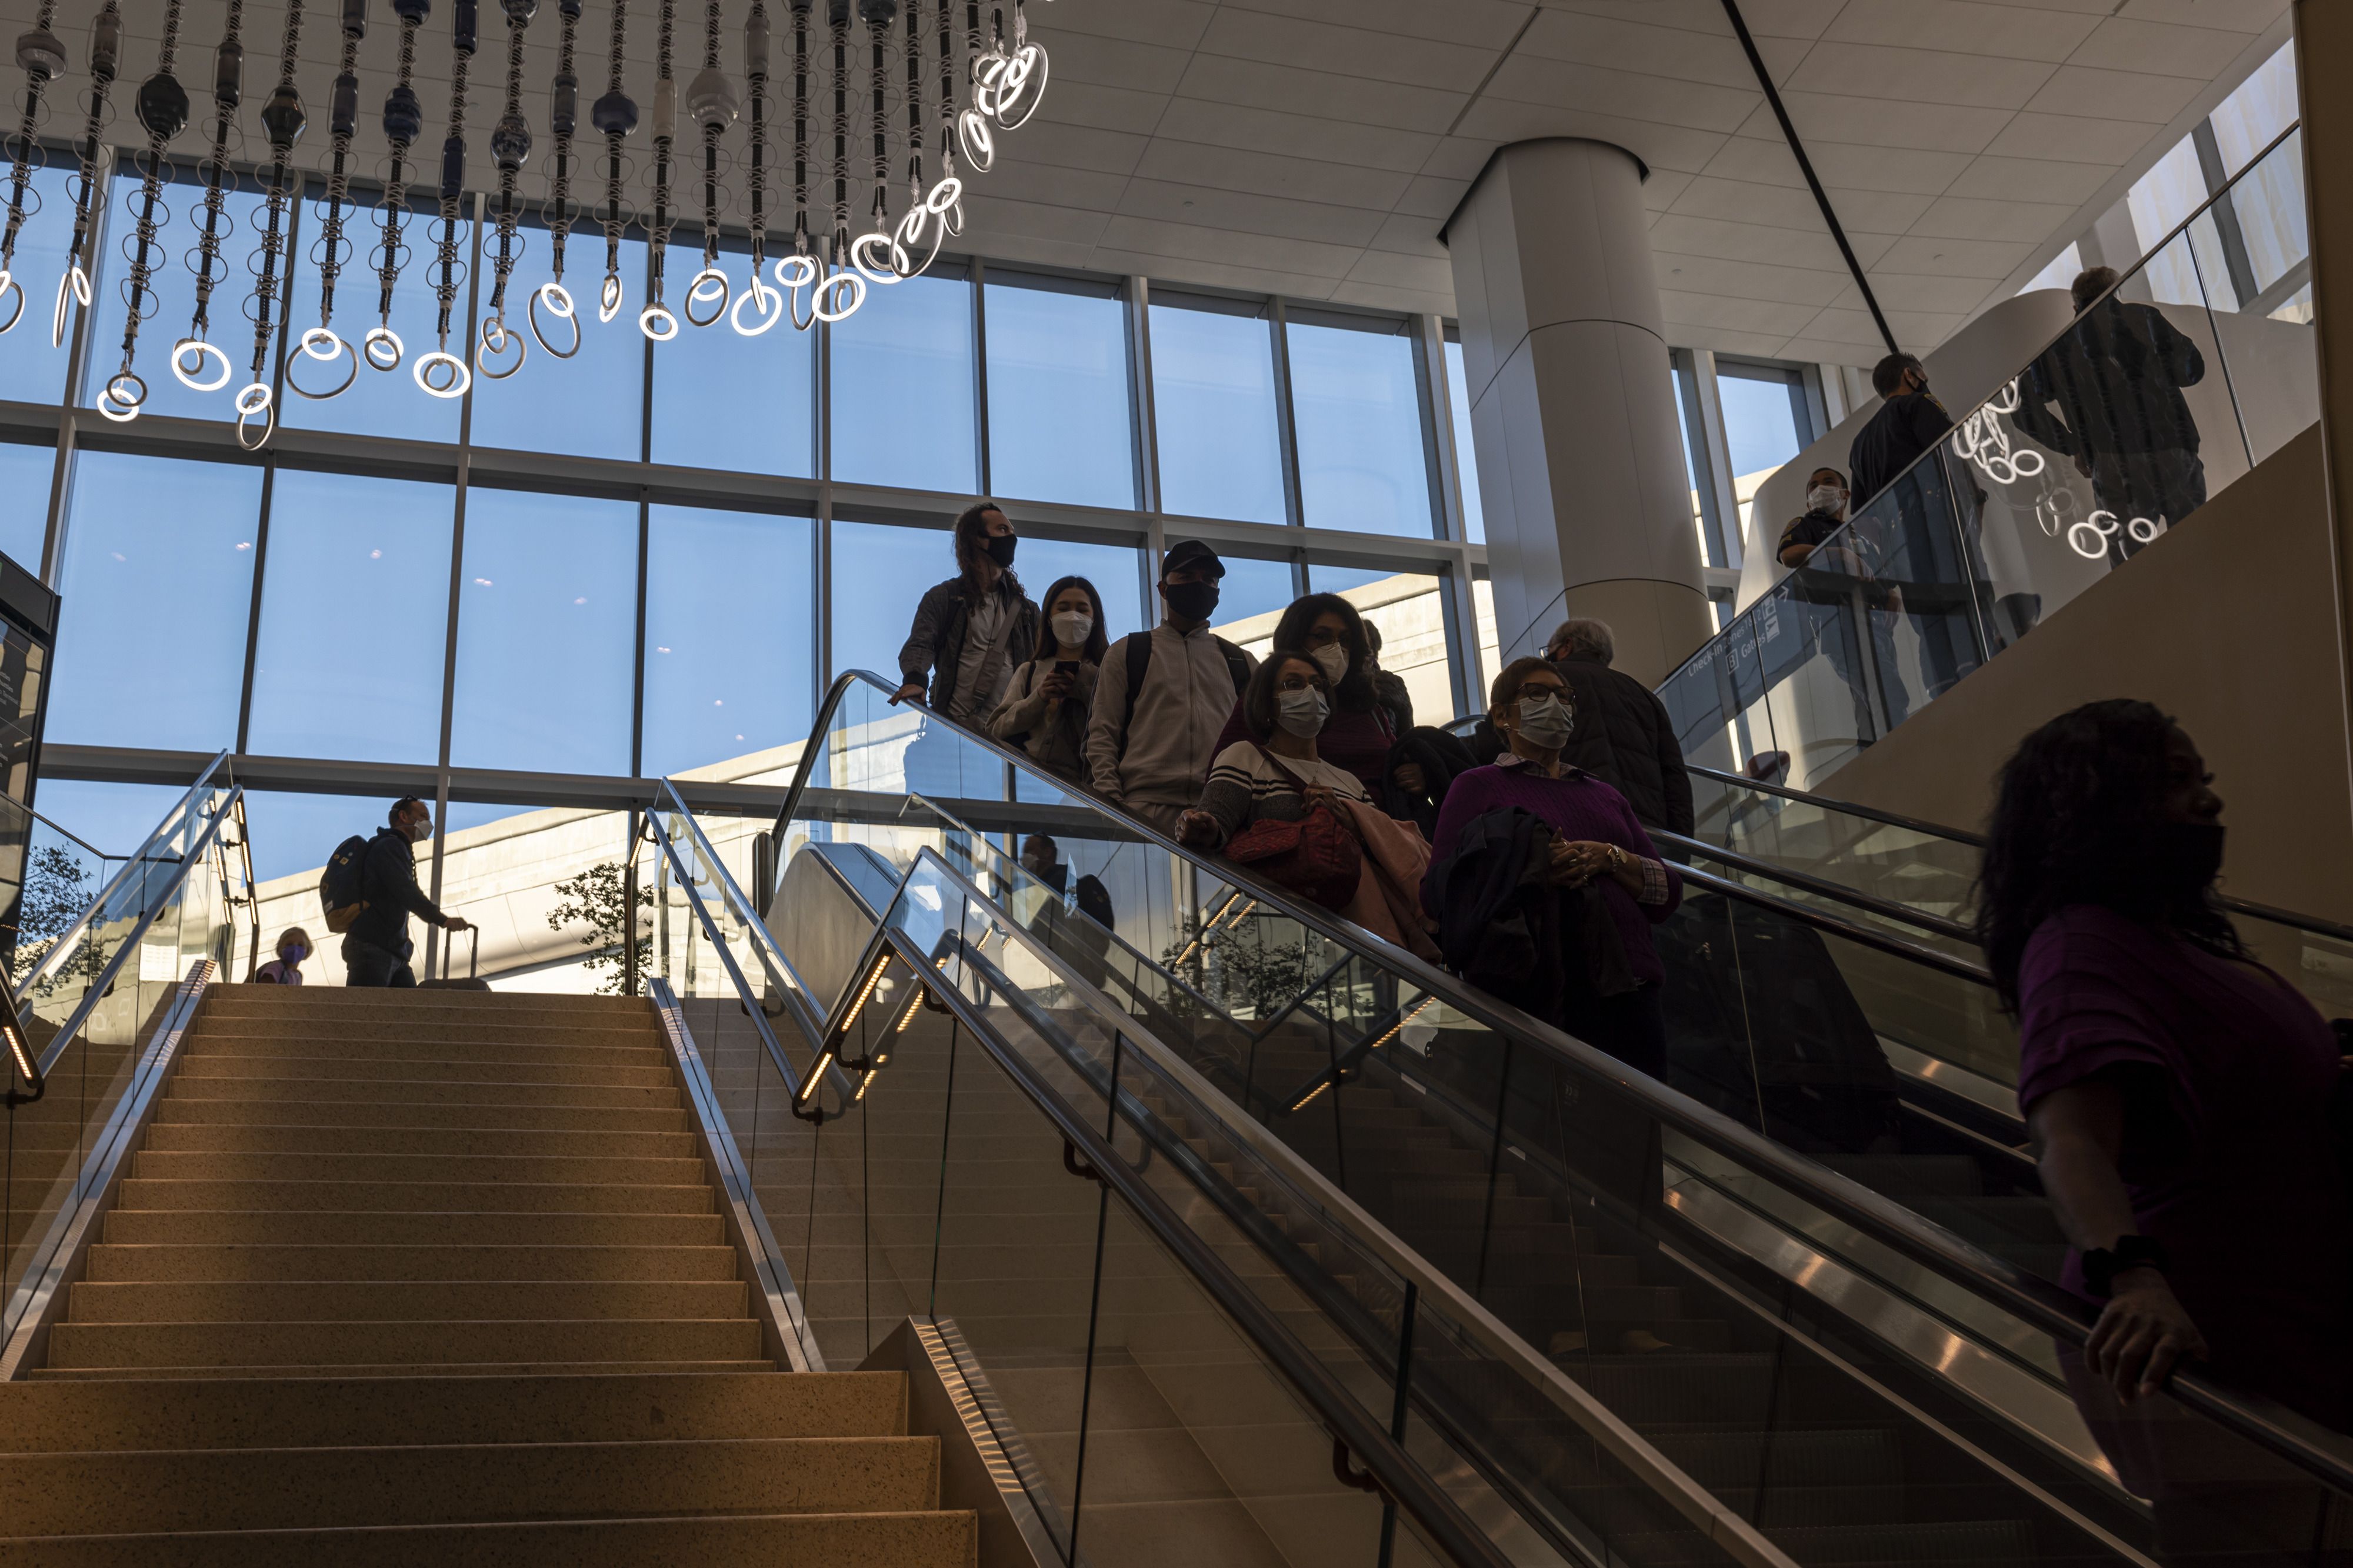 Photo of people coming down an escalator at an airport